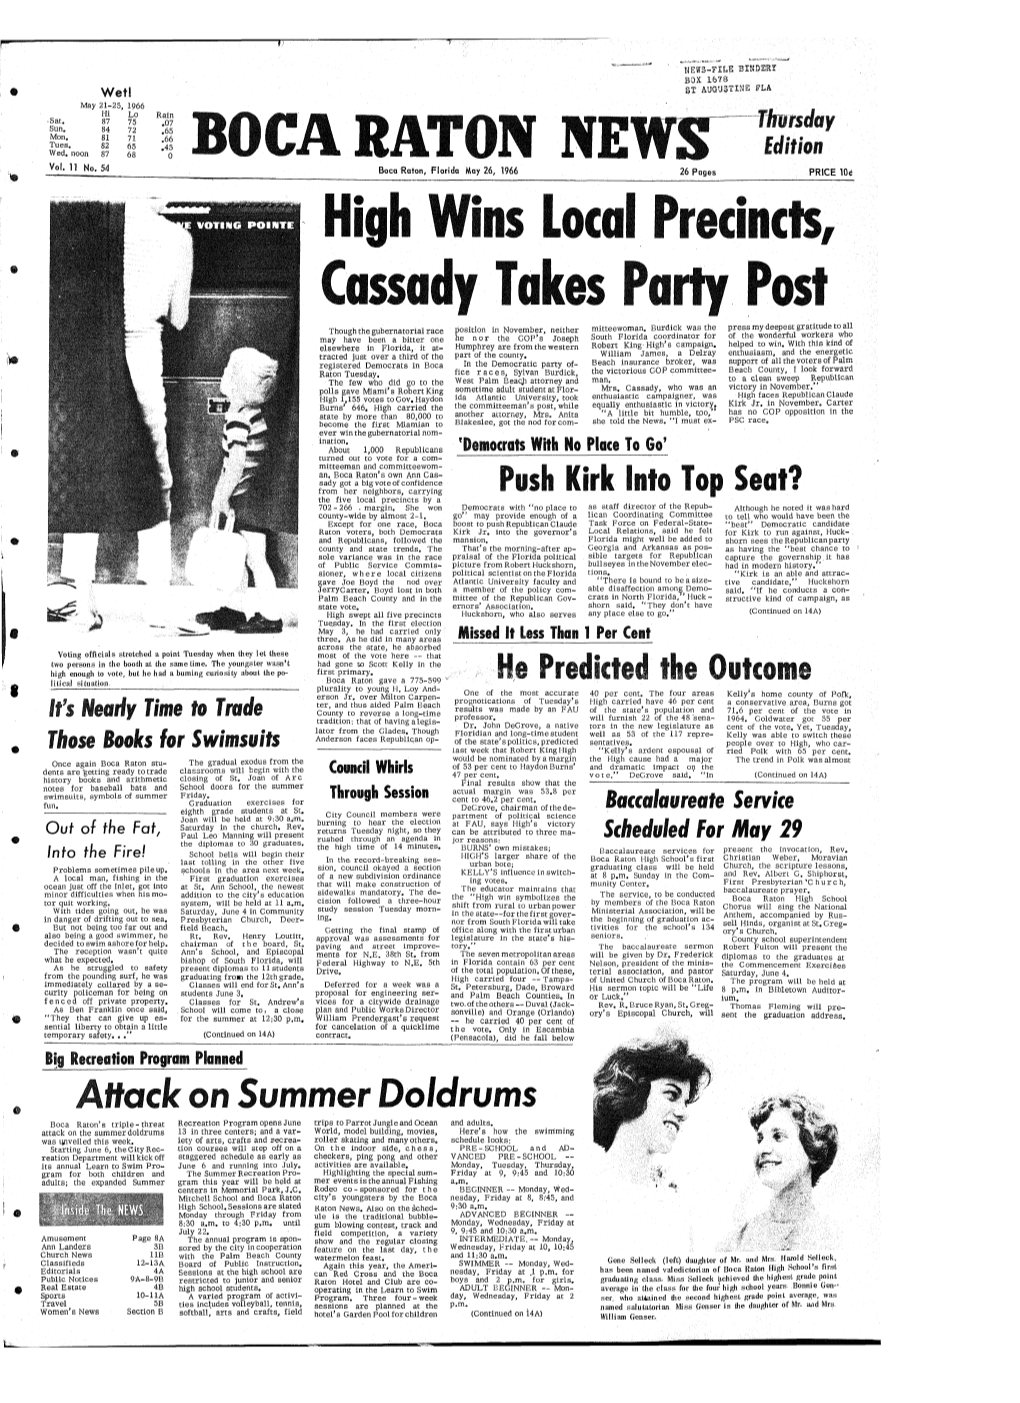 Florida May 26, 1966 26 Pages PRICE 104 High Wins Local Precincts, M Cassady Takes Party Post Position in November, Neither Mitteewoman